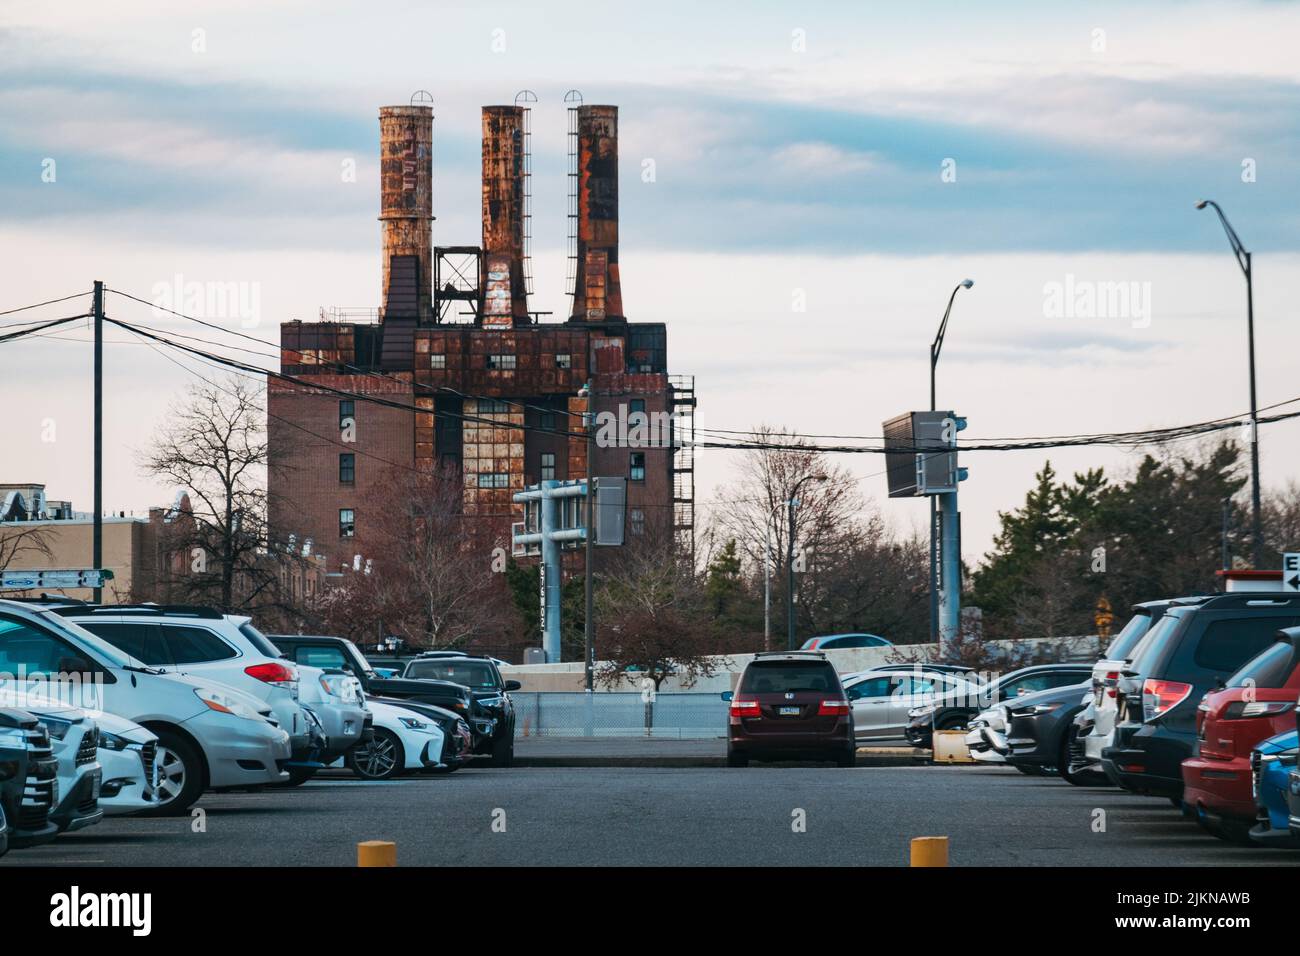 The former Willow Steam Generation Plant in Philadelphia, USA. Built in 1927, now defunct and derelict. Stock Photo